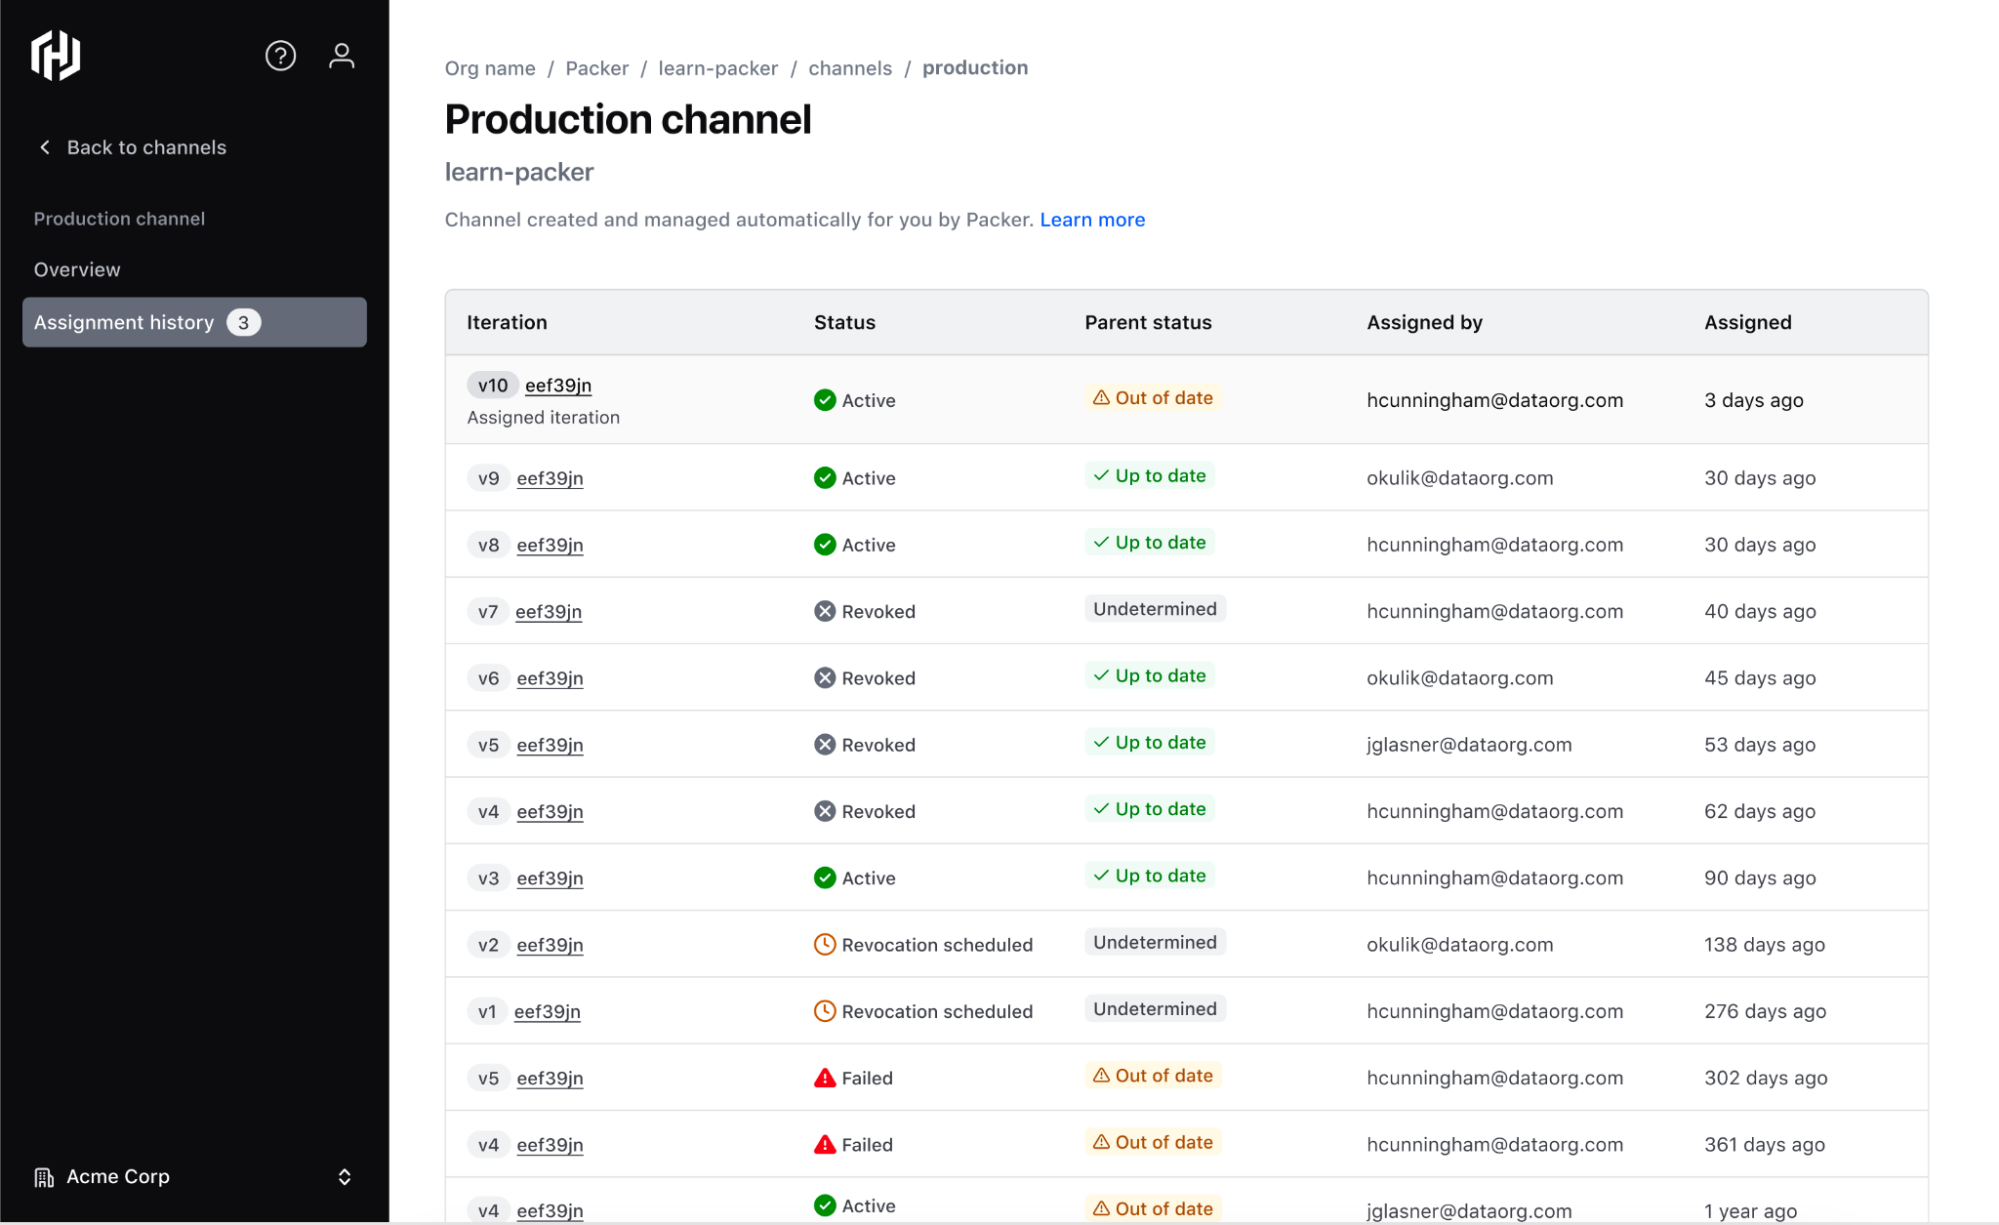 View channel history for all iterations